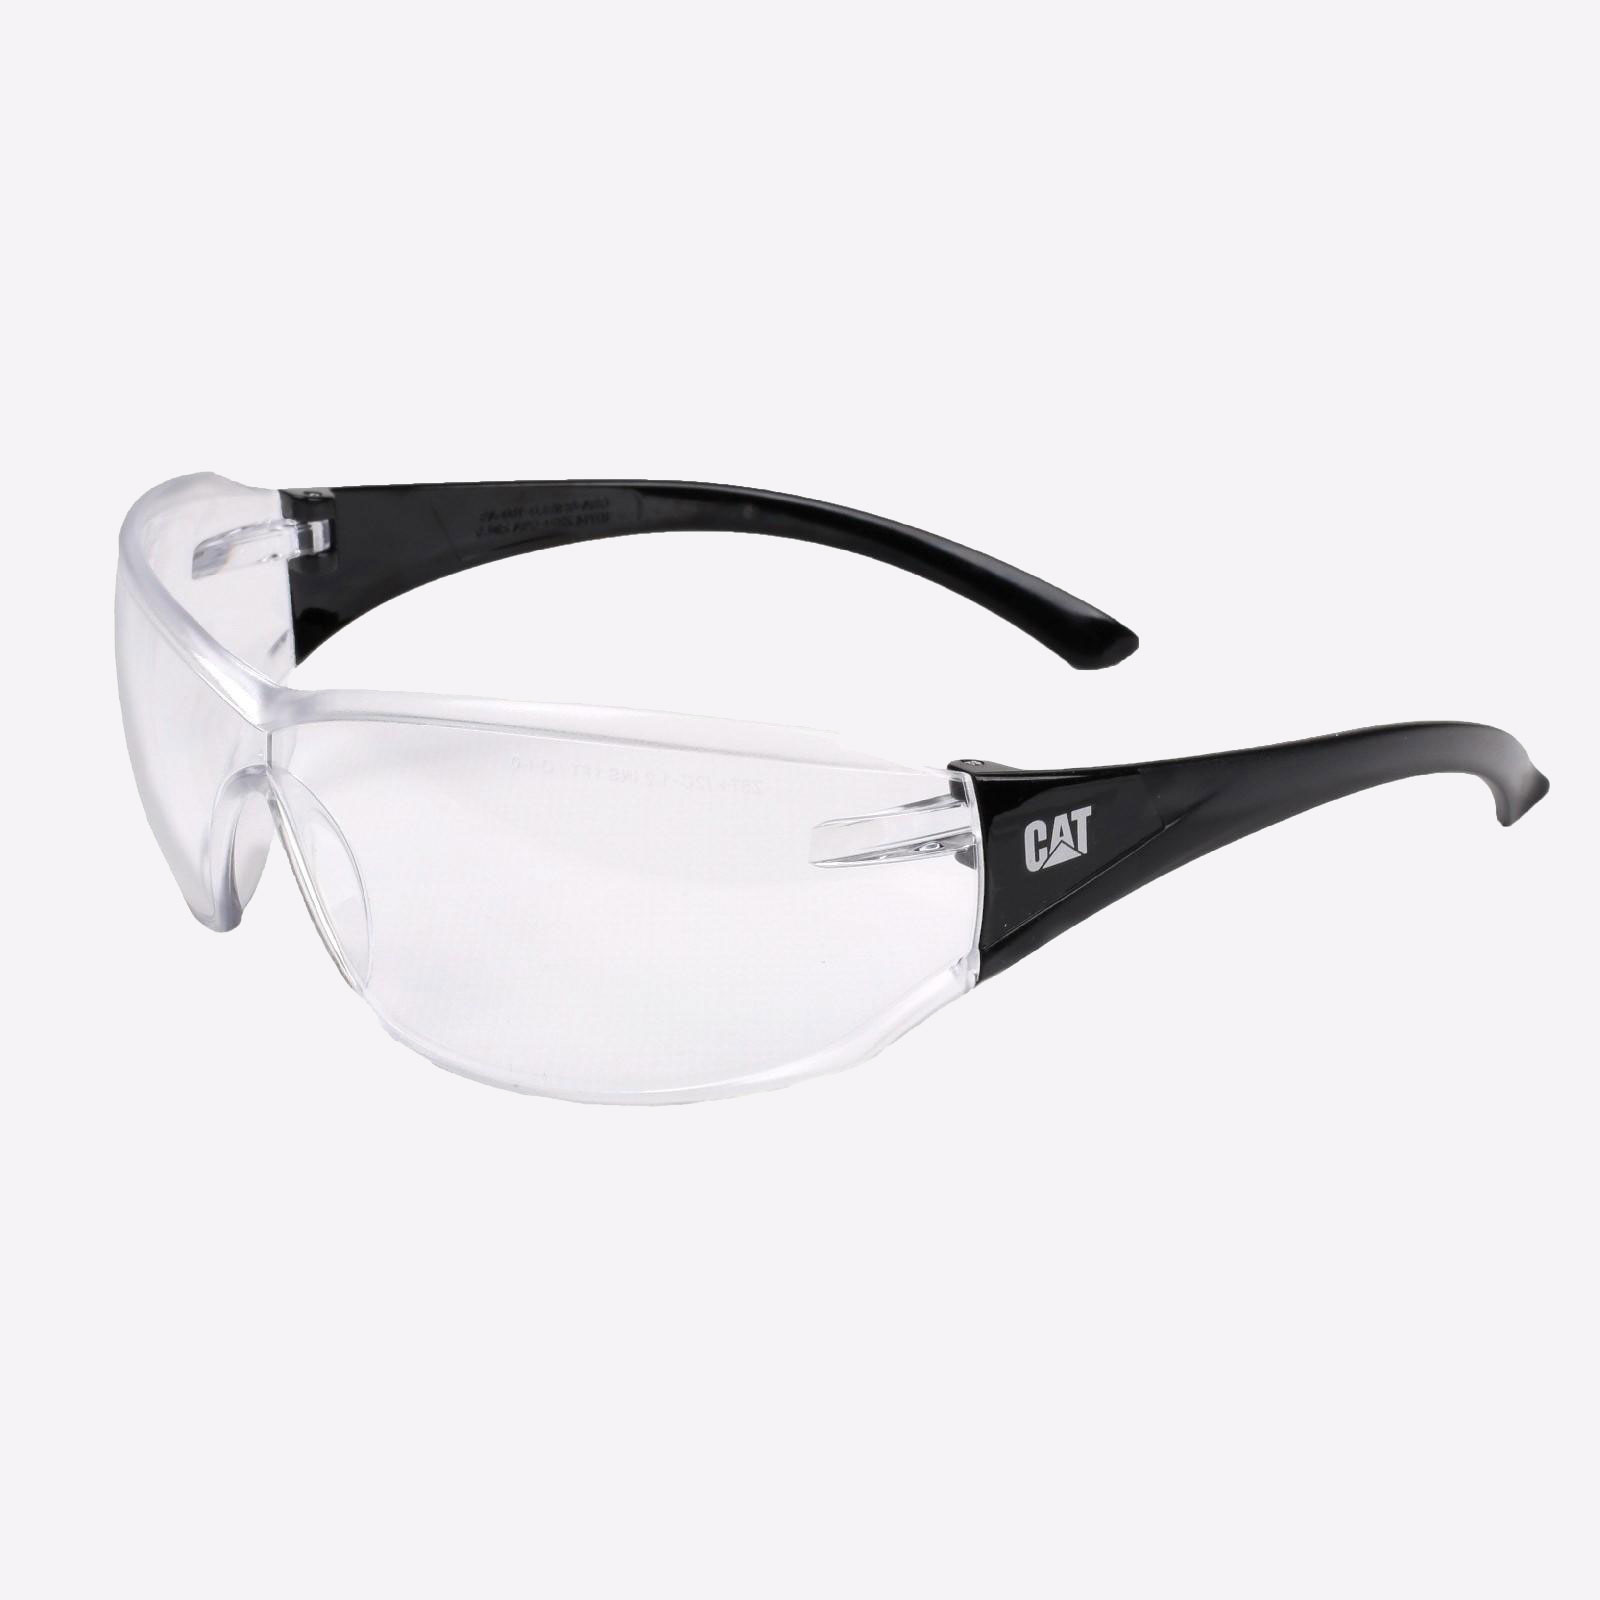 Caterpillar Shield Safety Glasses  - GRD-23425-38429-01